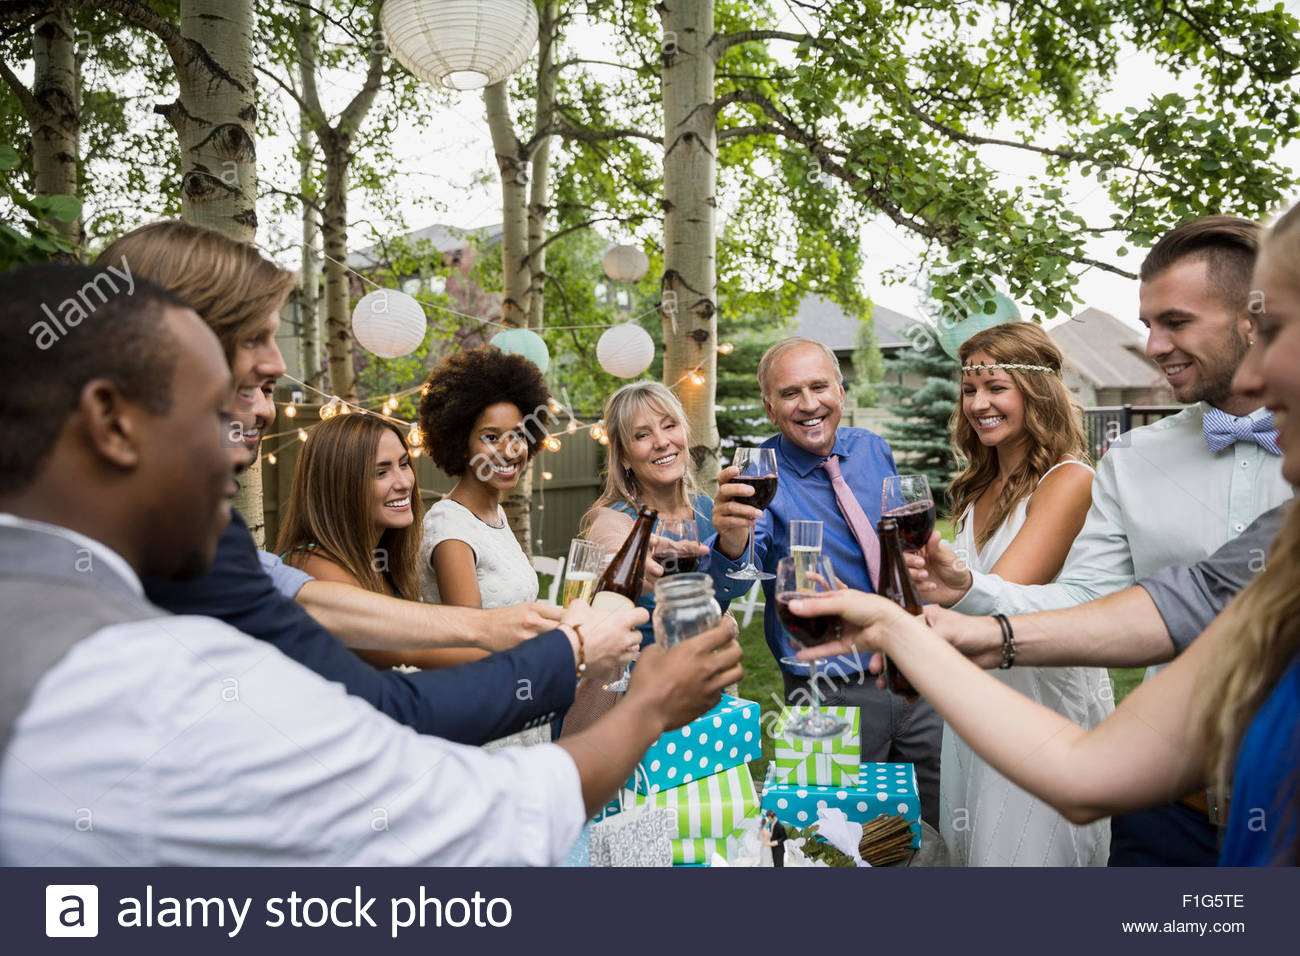 Bride, groom and wedding guests toasting drinks reception Stock Photo